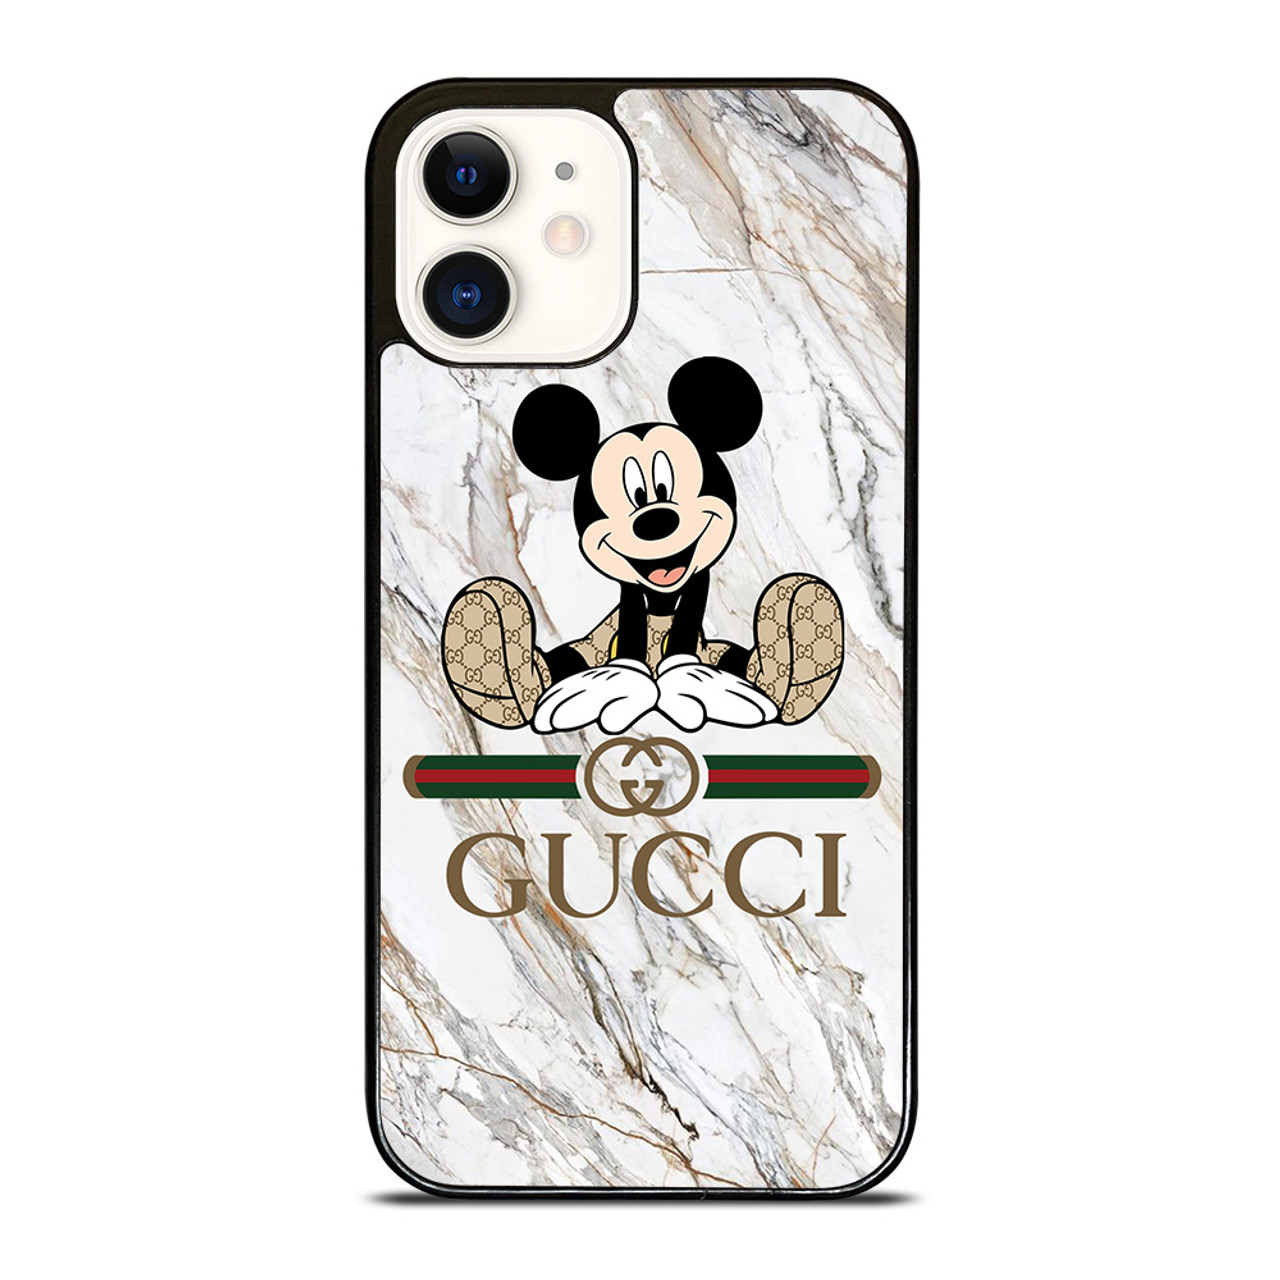 Herinnering Waden afbetalen GUCCI MICKEY MOUSE iPhone 12 Case Cover